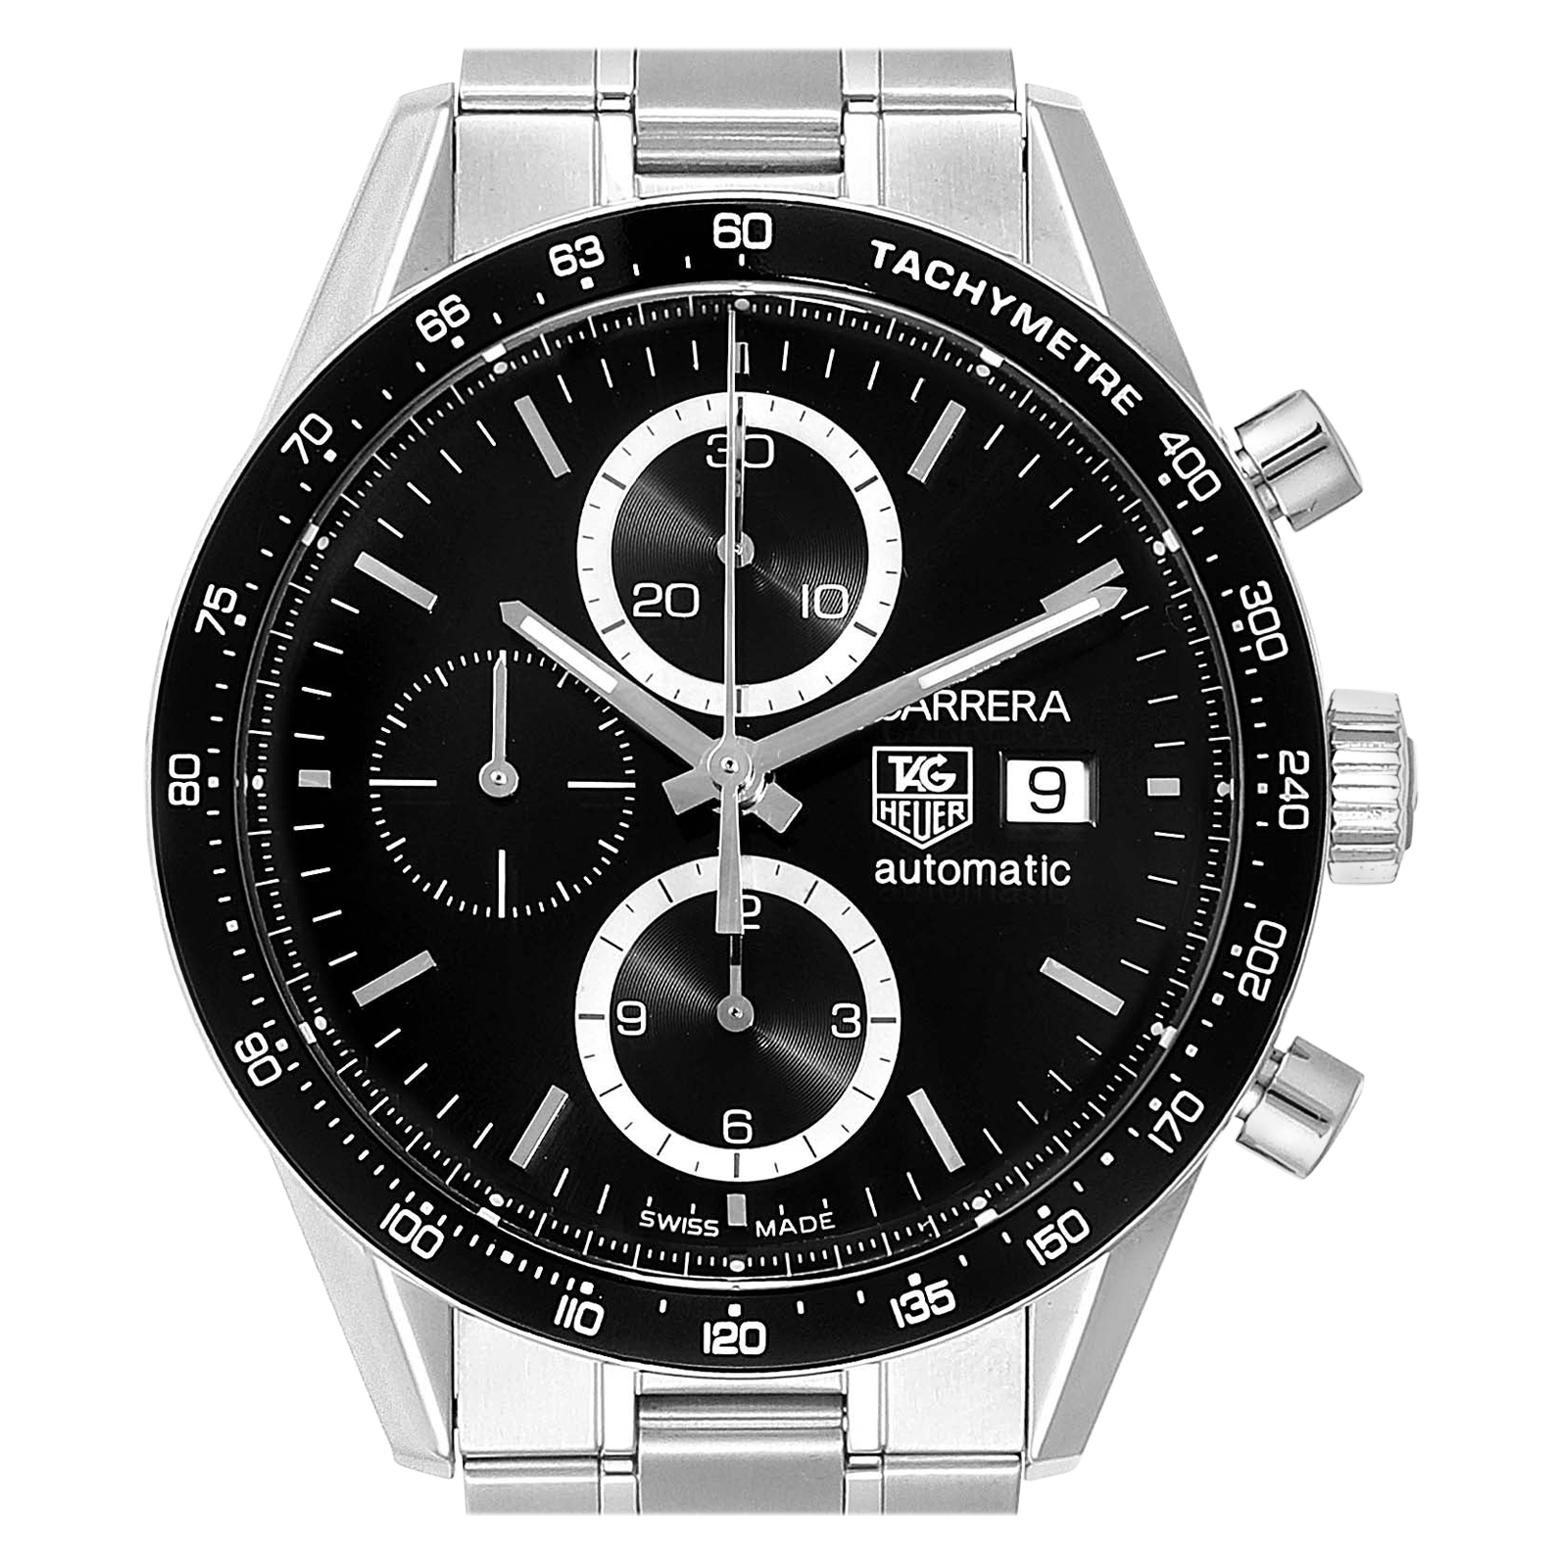 TAG Heuer Carrera Tachymeter Chronograph Men's Watch CV2010 Box Card For Sale